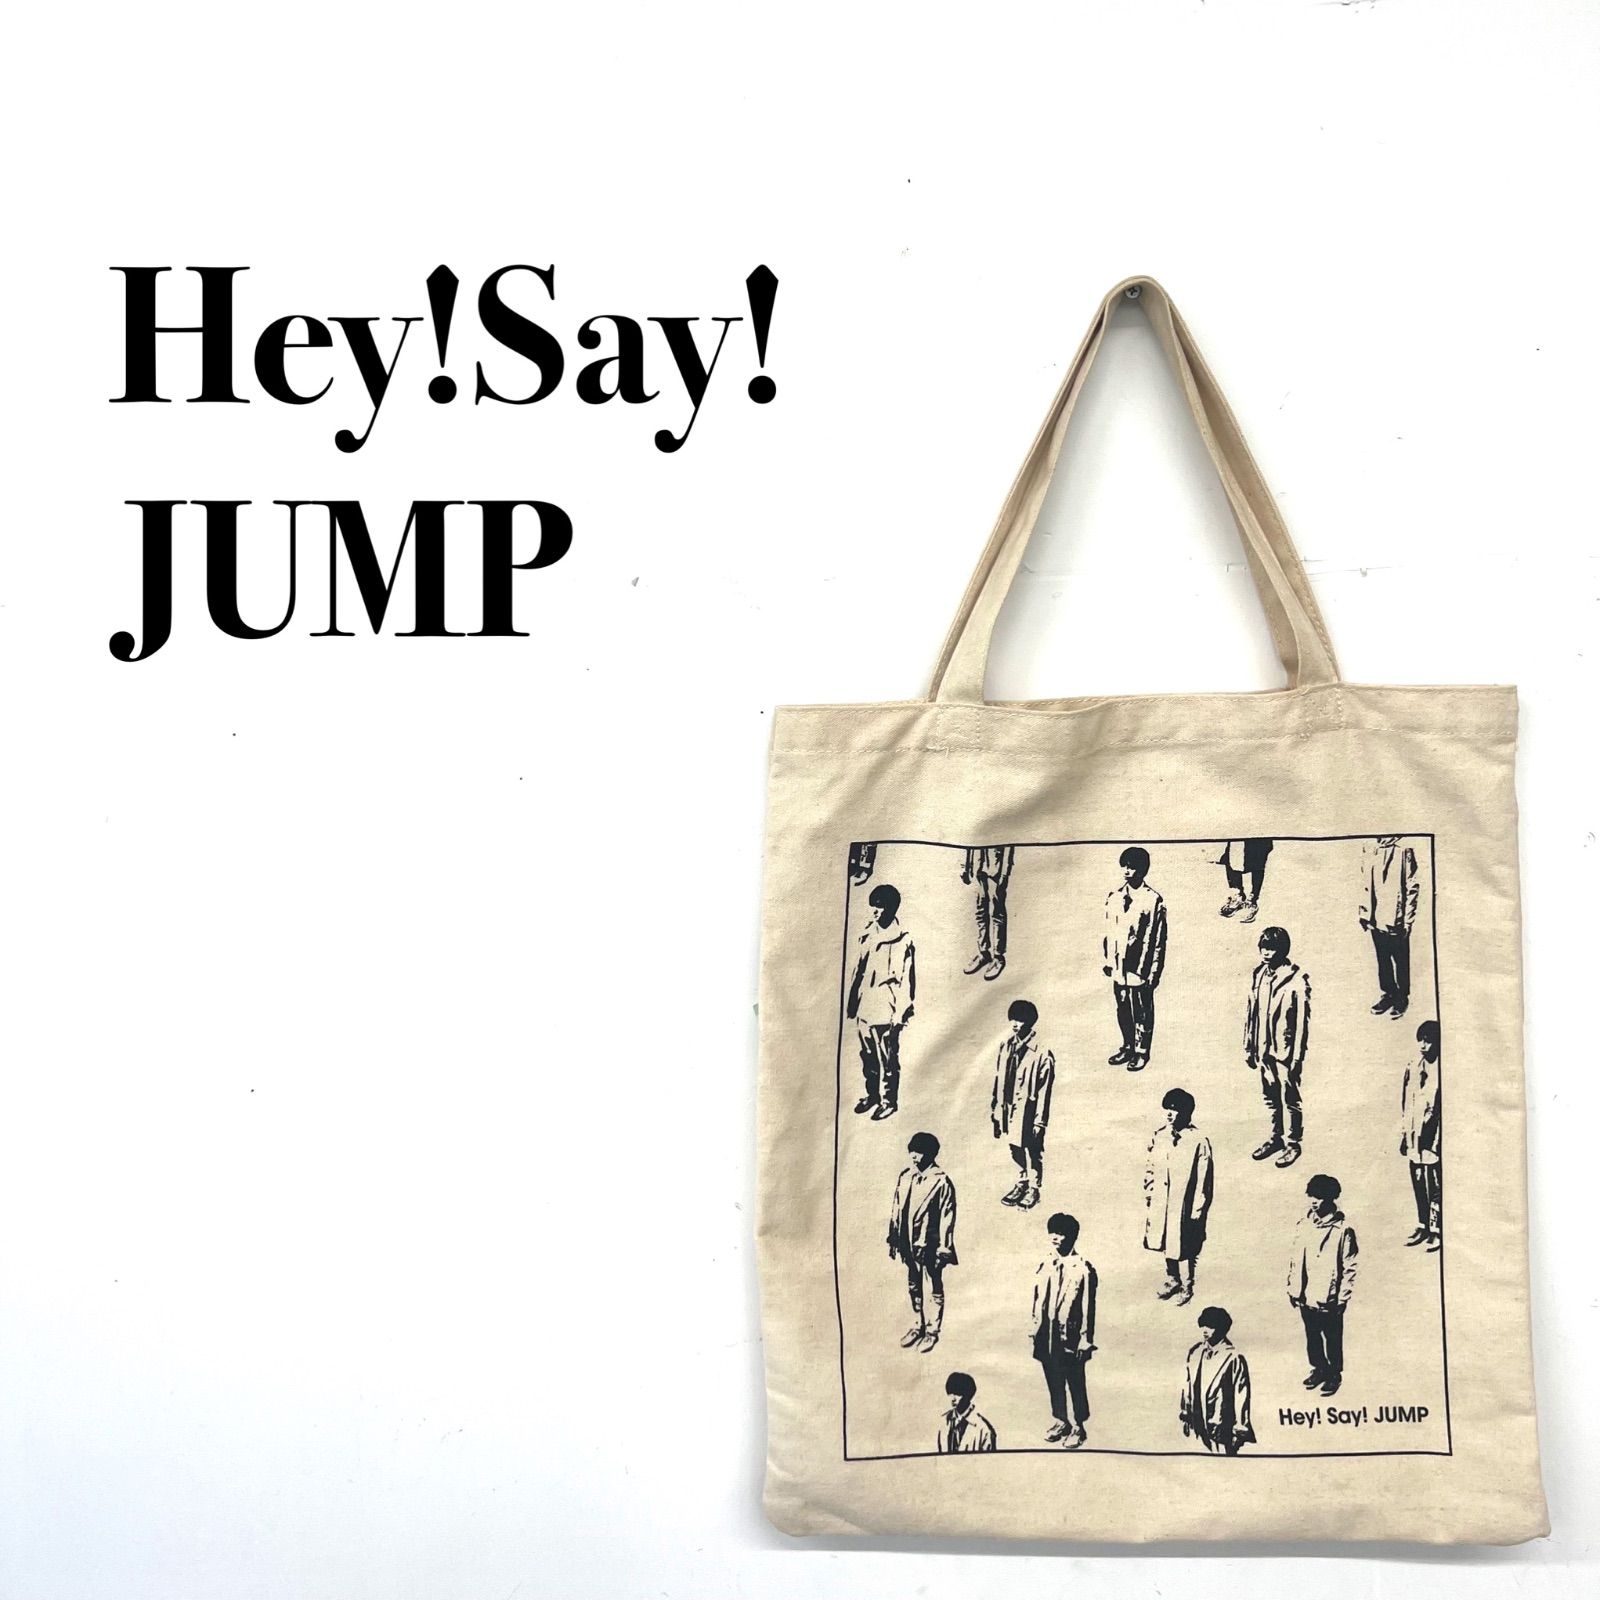 Hey!Say!JUMP ヘイセイジャンプ ツアーグッズ トートバッグ バッグ